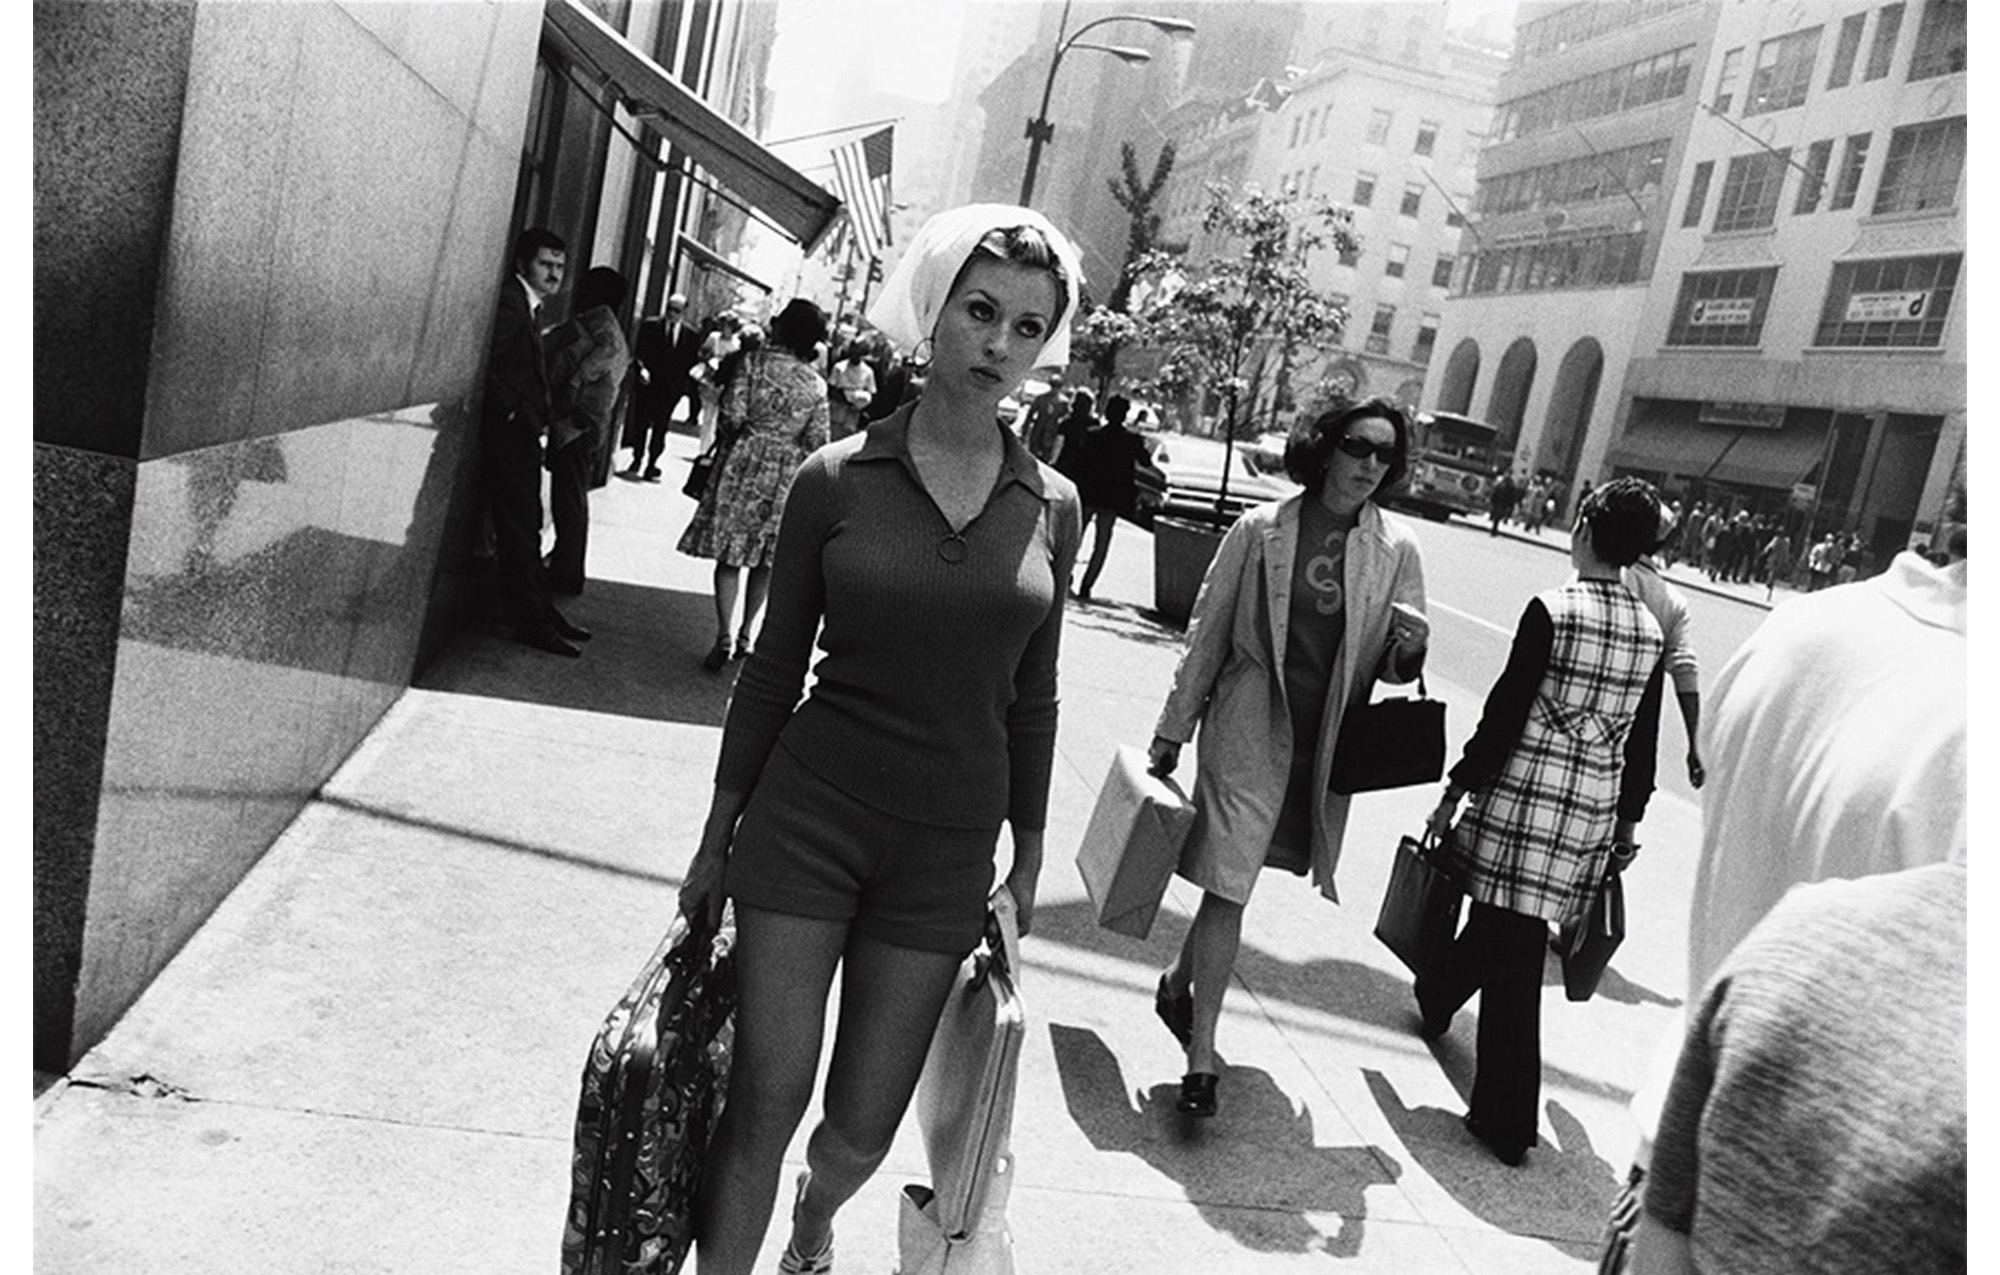 city sidewalk with pedestrians, young woman in front center, hair under scarf wearing shorts and knit top walks carrying paisley suitcase in one hand and two other bags in the other